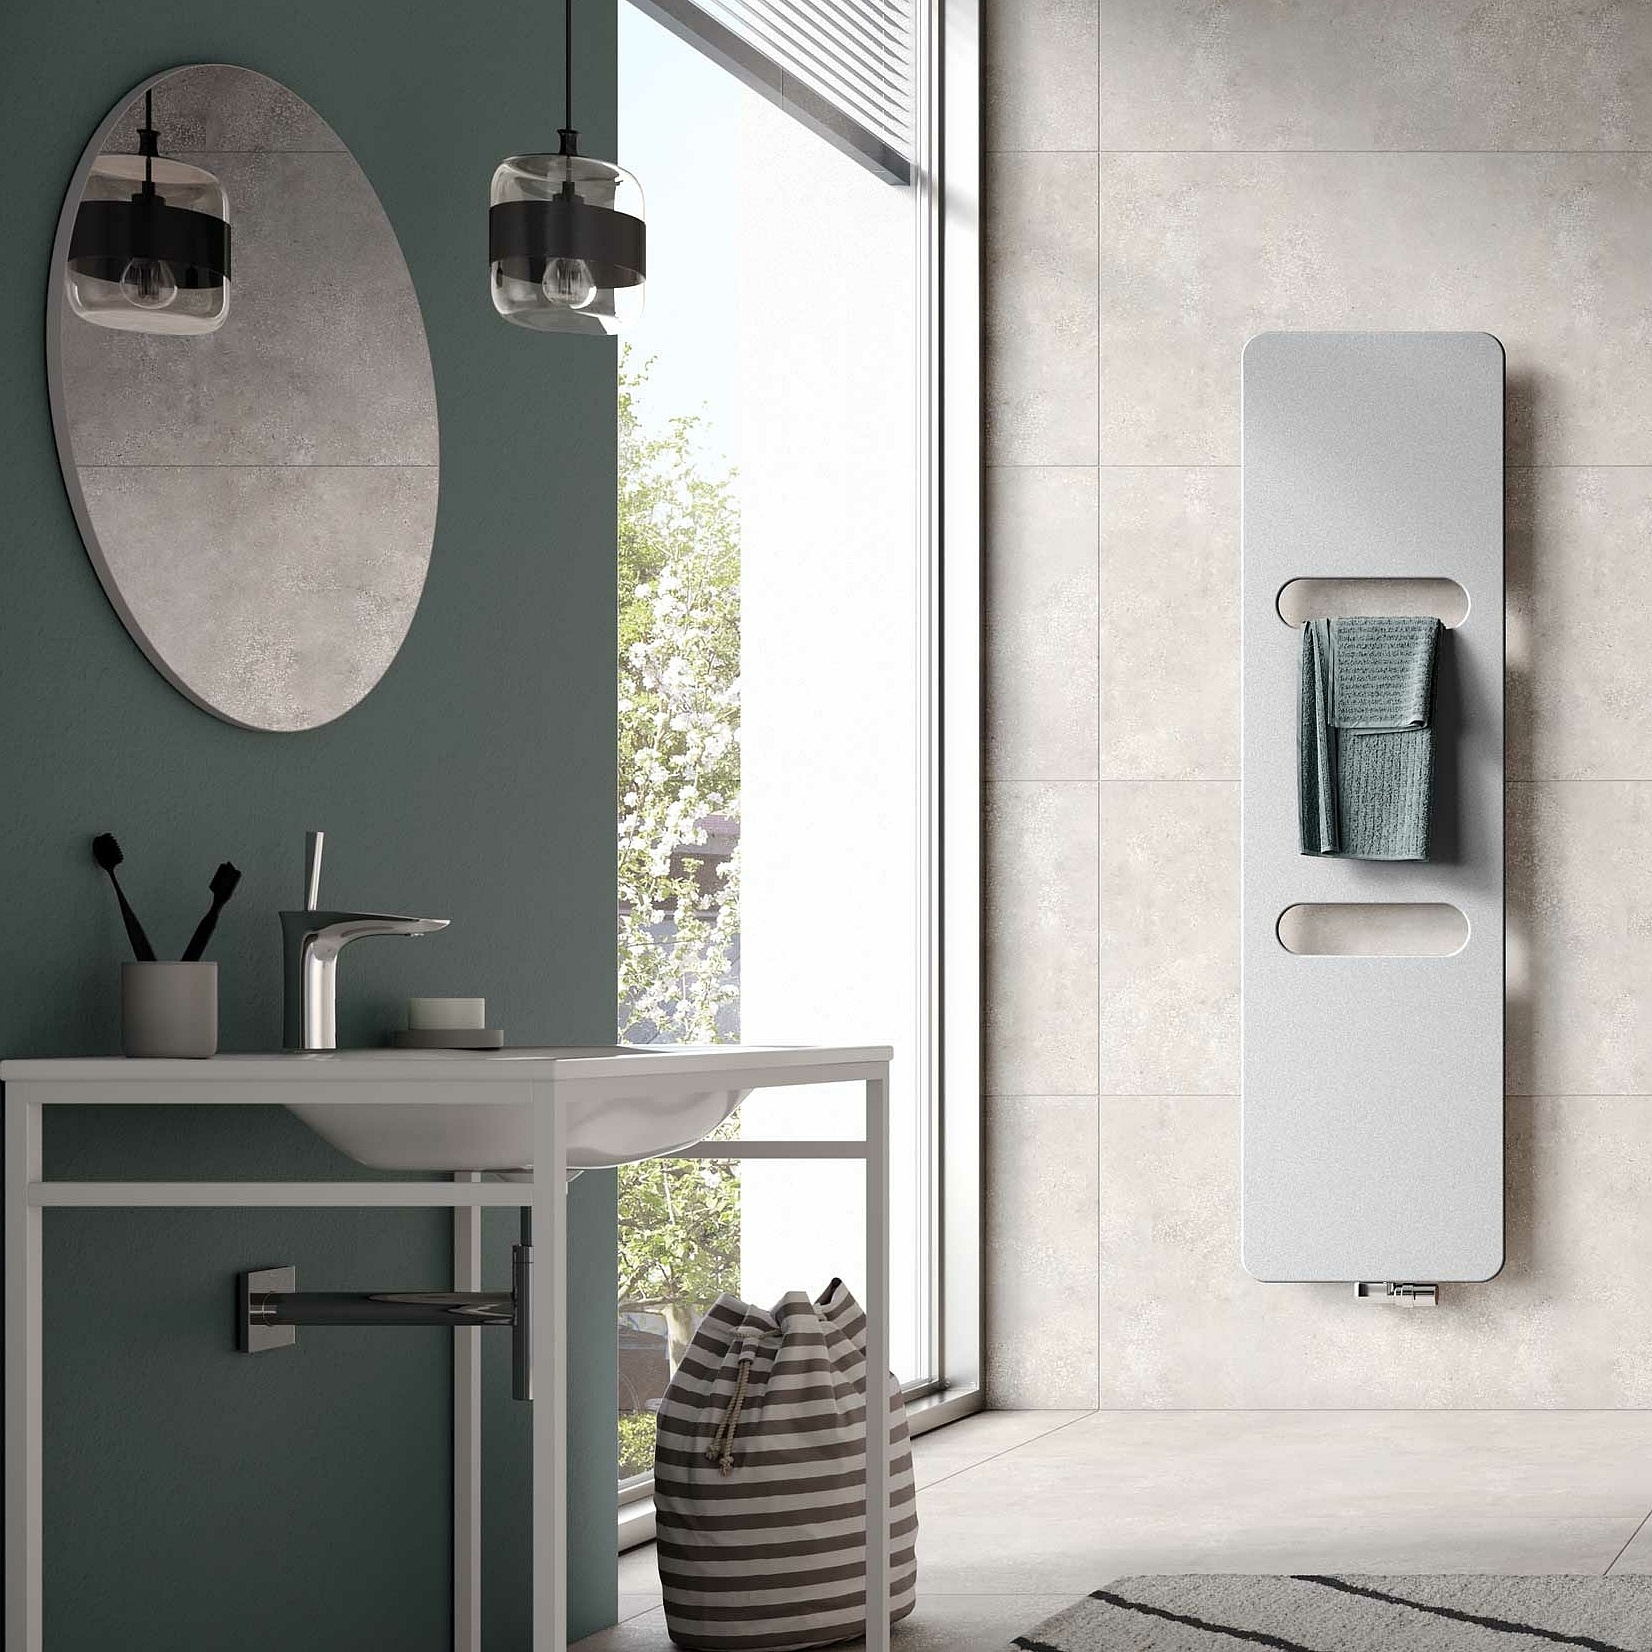 With two rounded gaps, the Fineo designer and bathroom radiator from Kermi gets towels or clothes lovely and warm in no time.